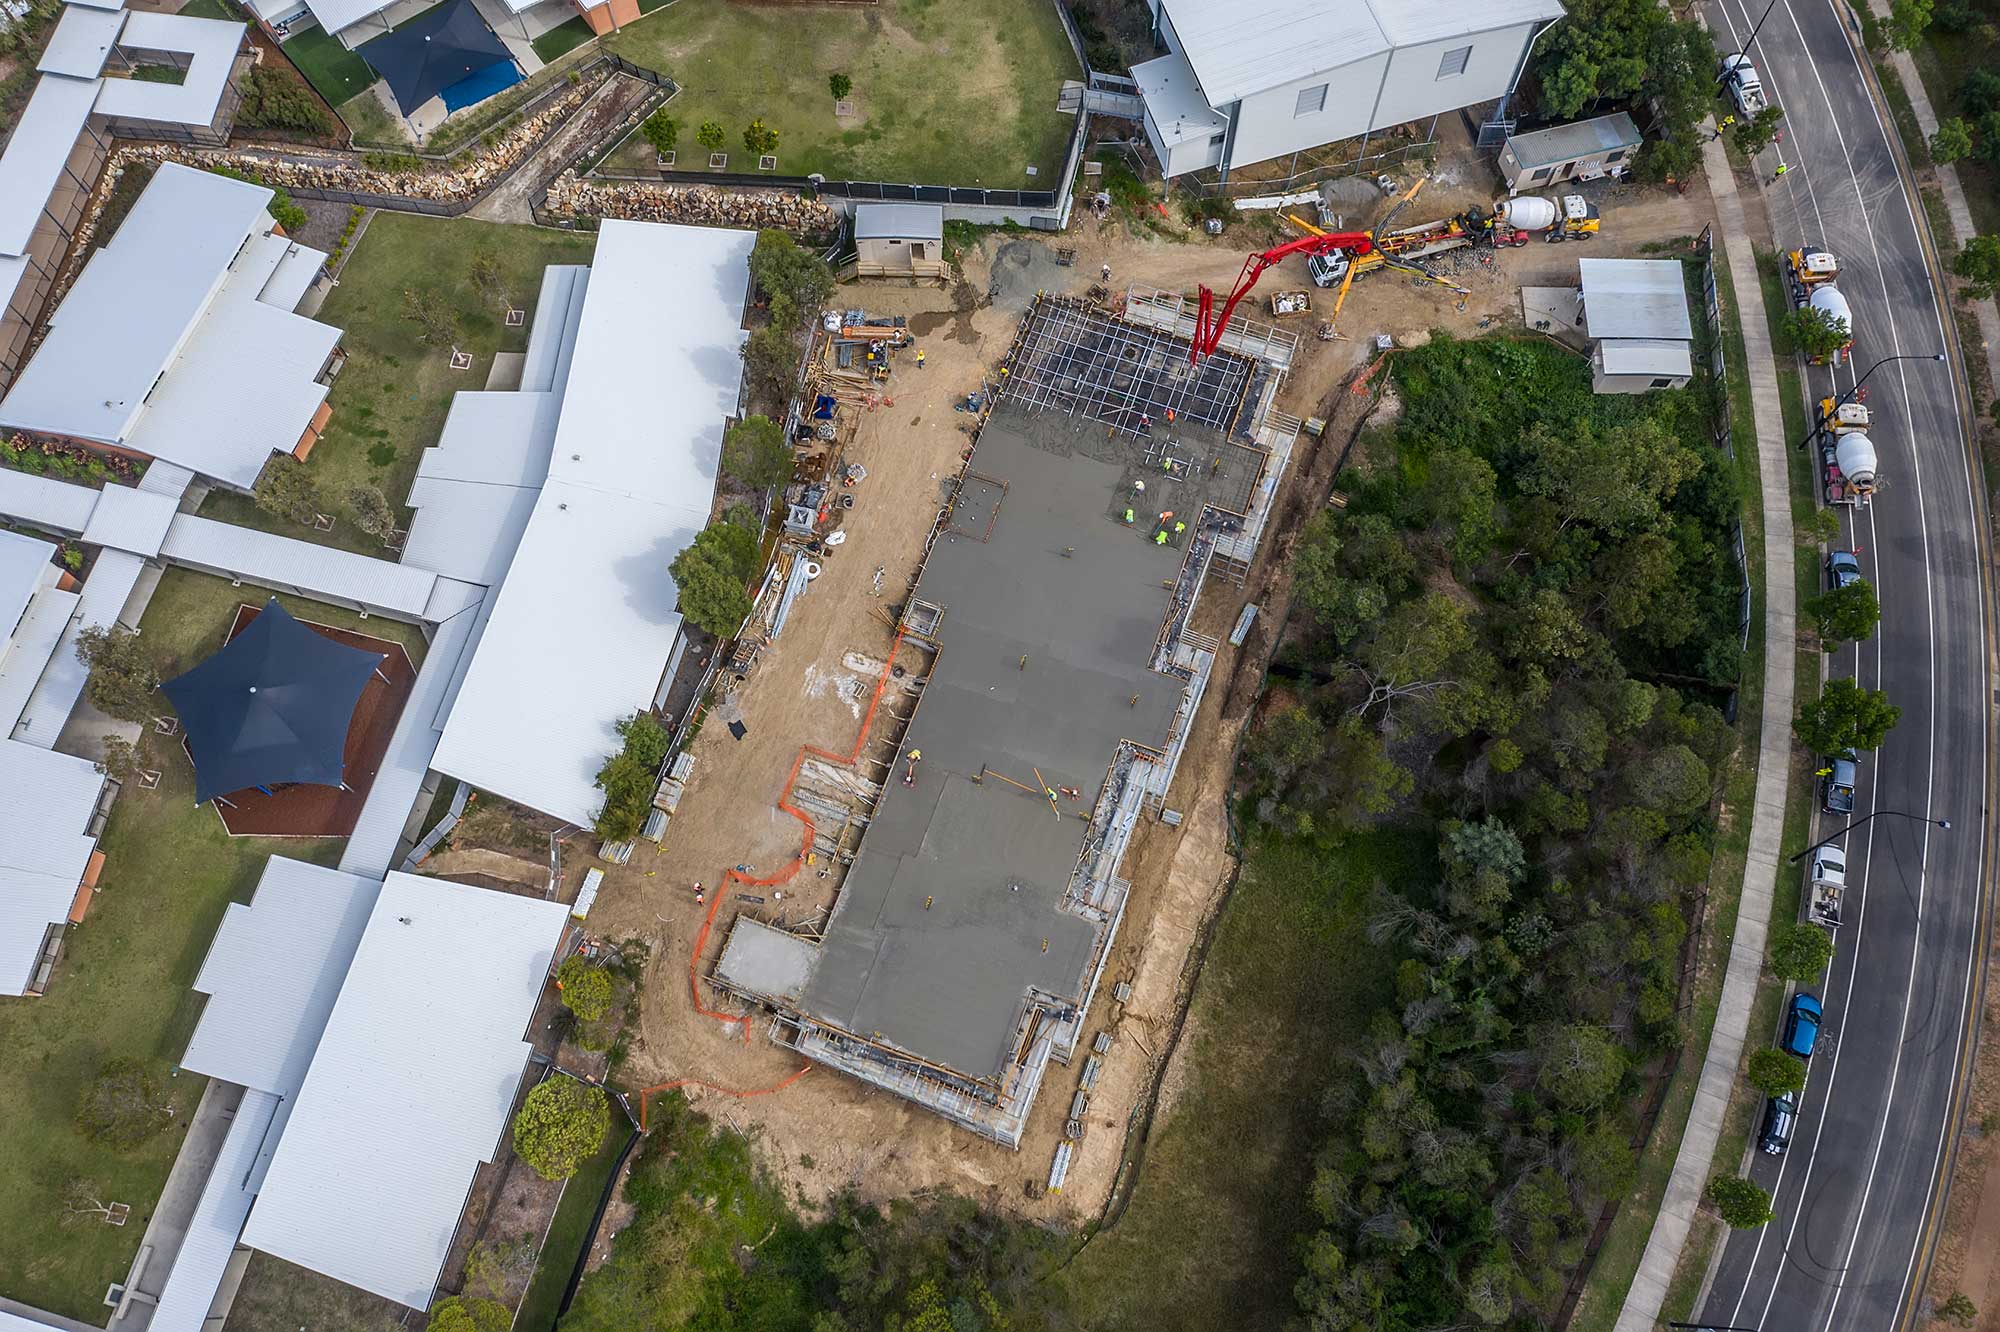 The Mavic2Pro at 90 metres above the ground hovering over the Augusta State School 